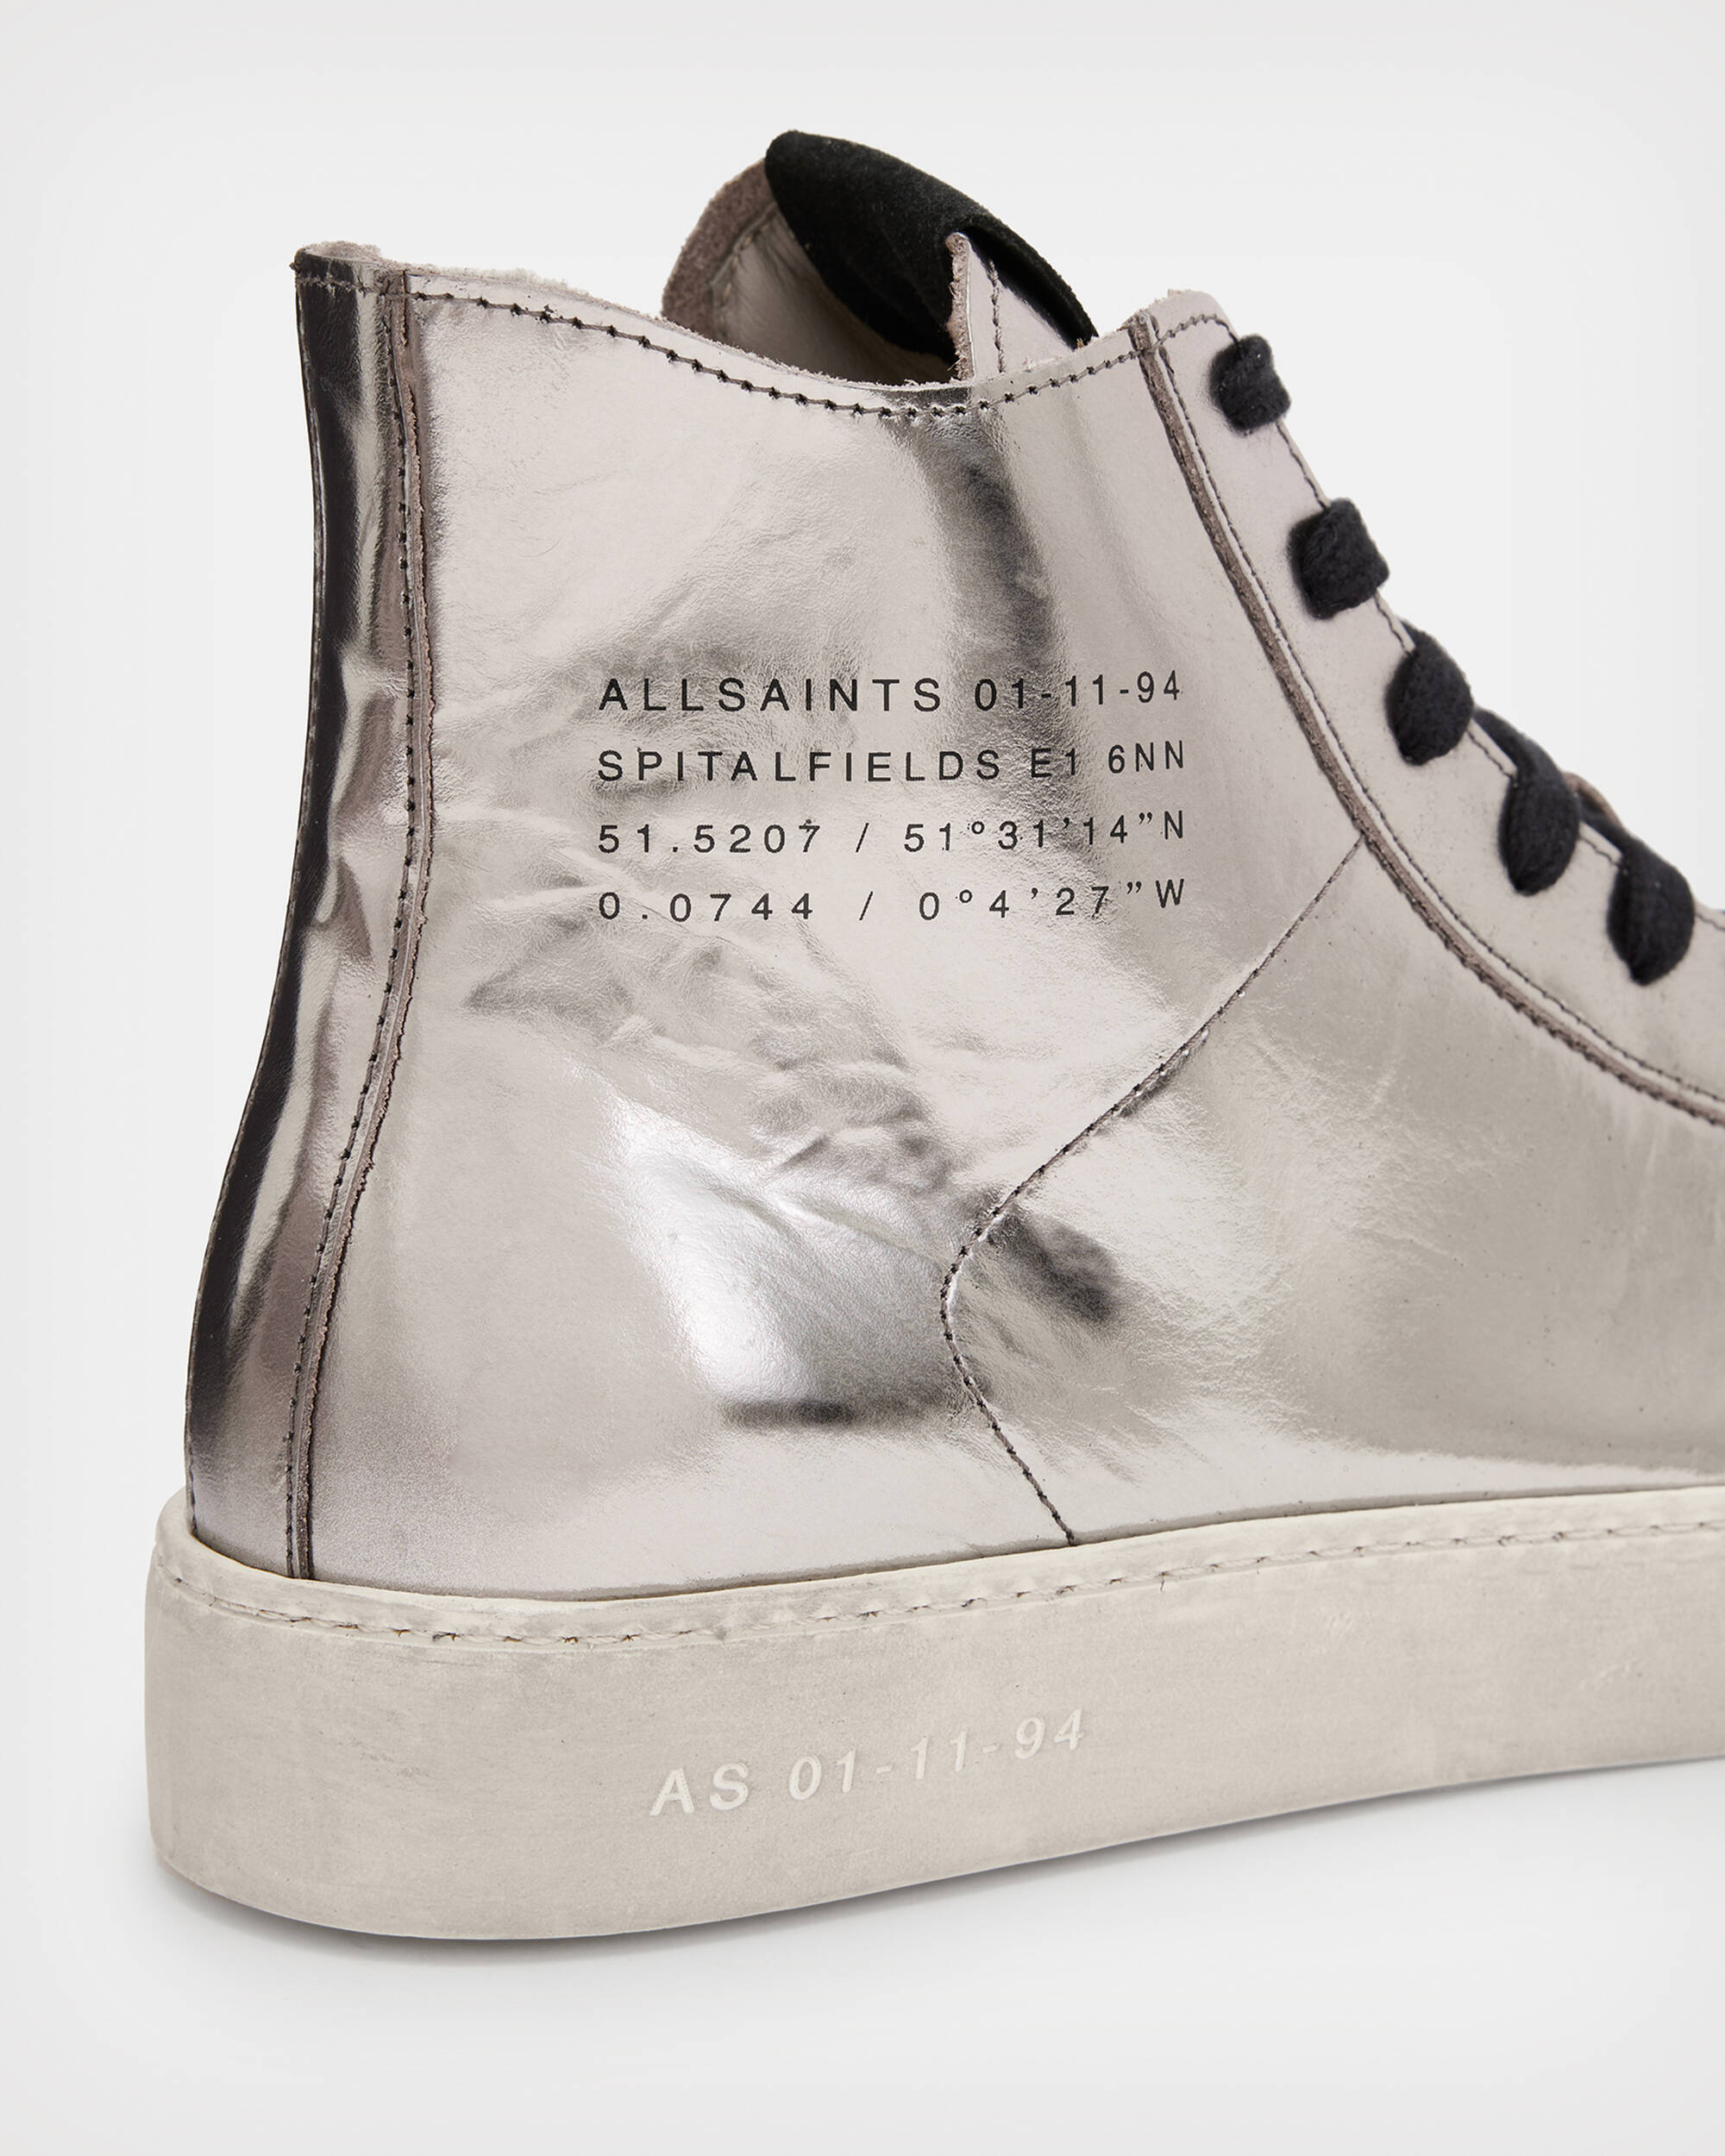 Tana Metallic Leather High Top Trainers  large image number 5